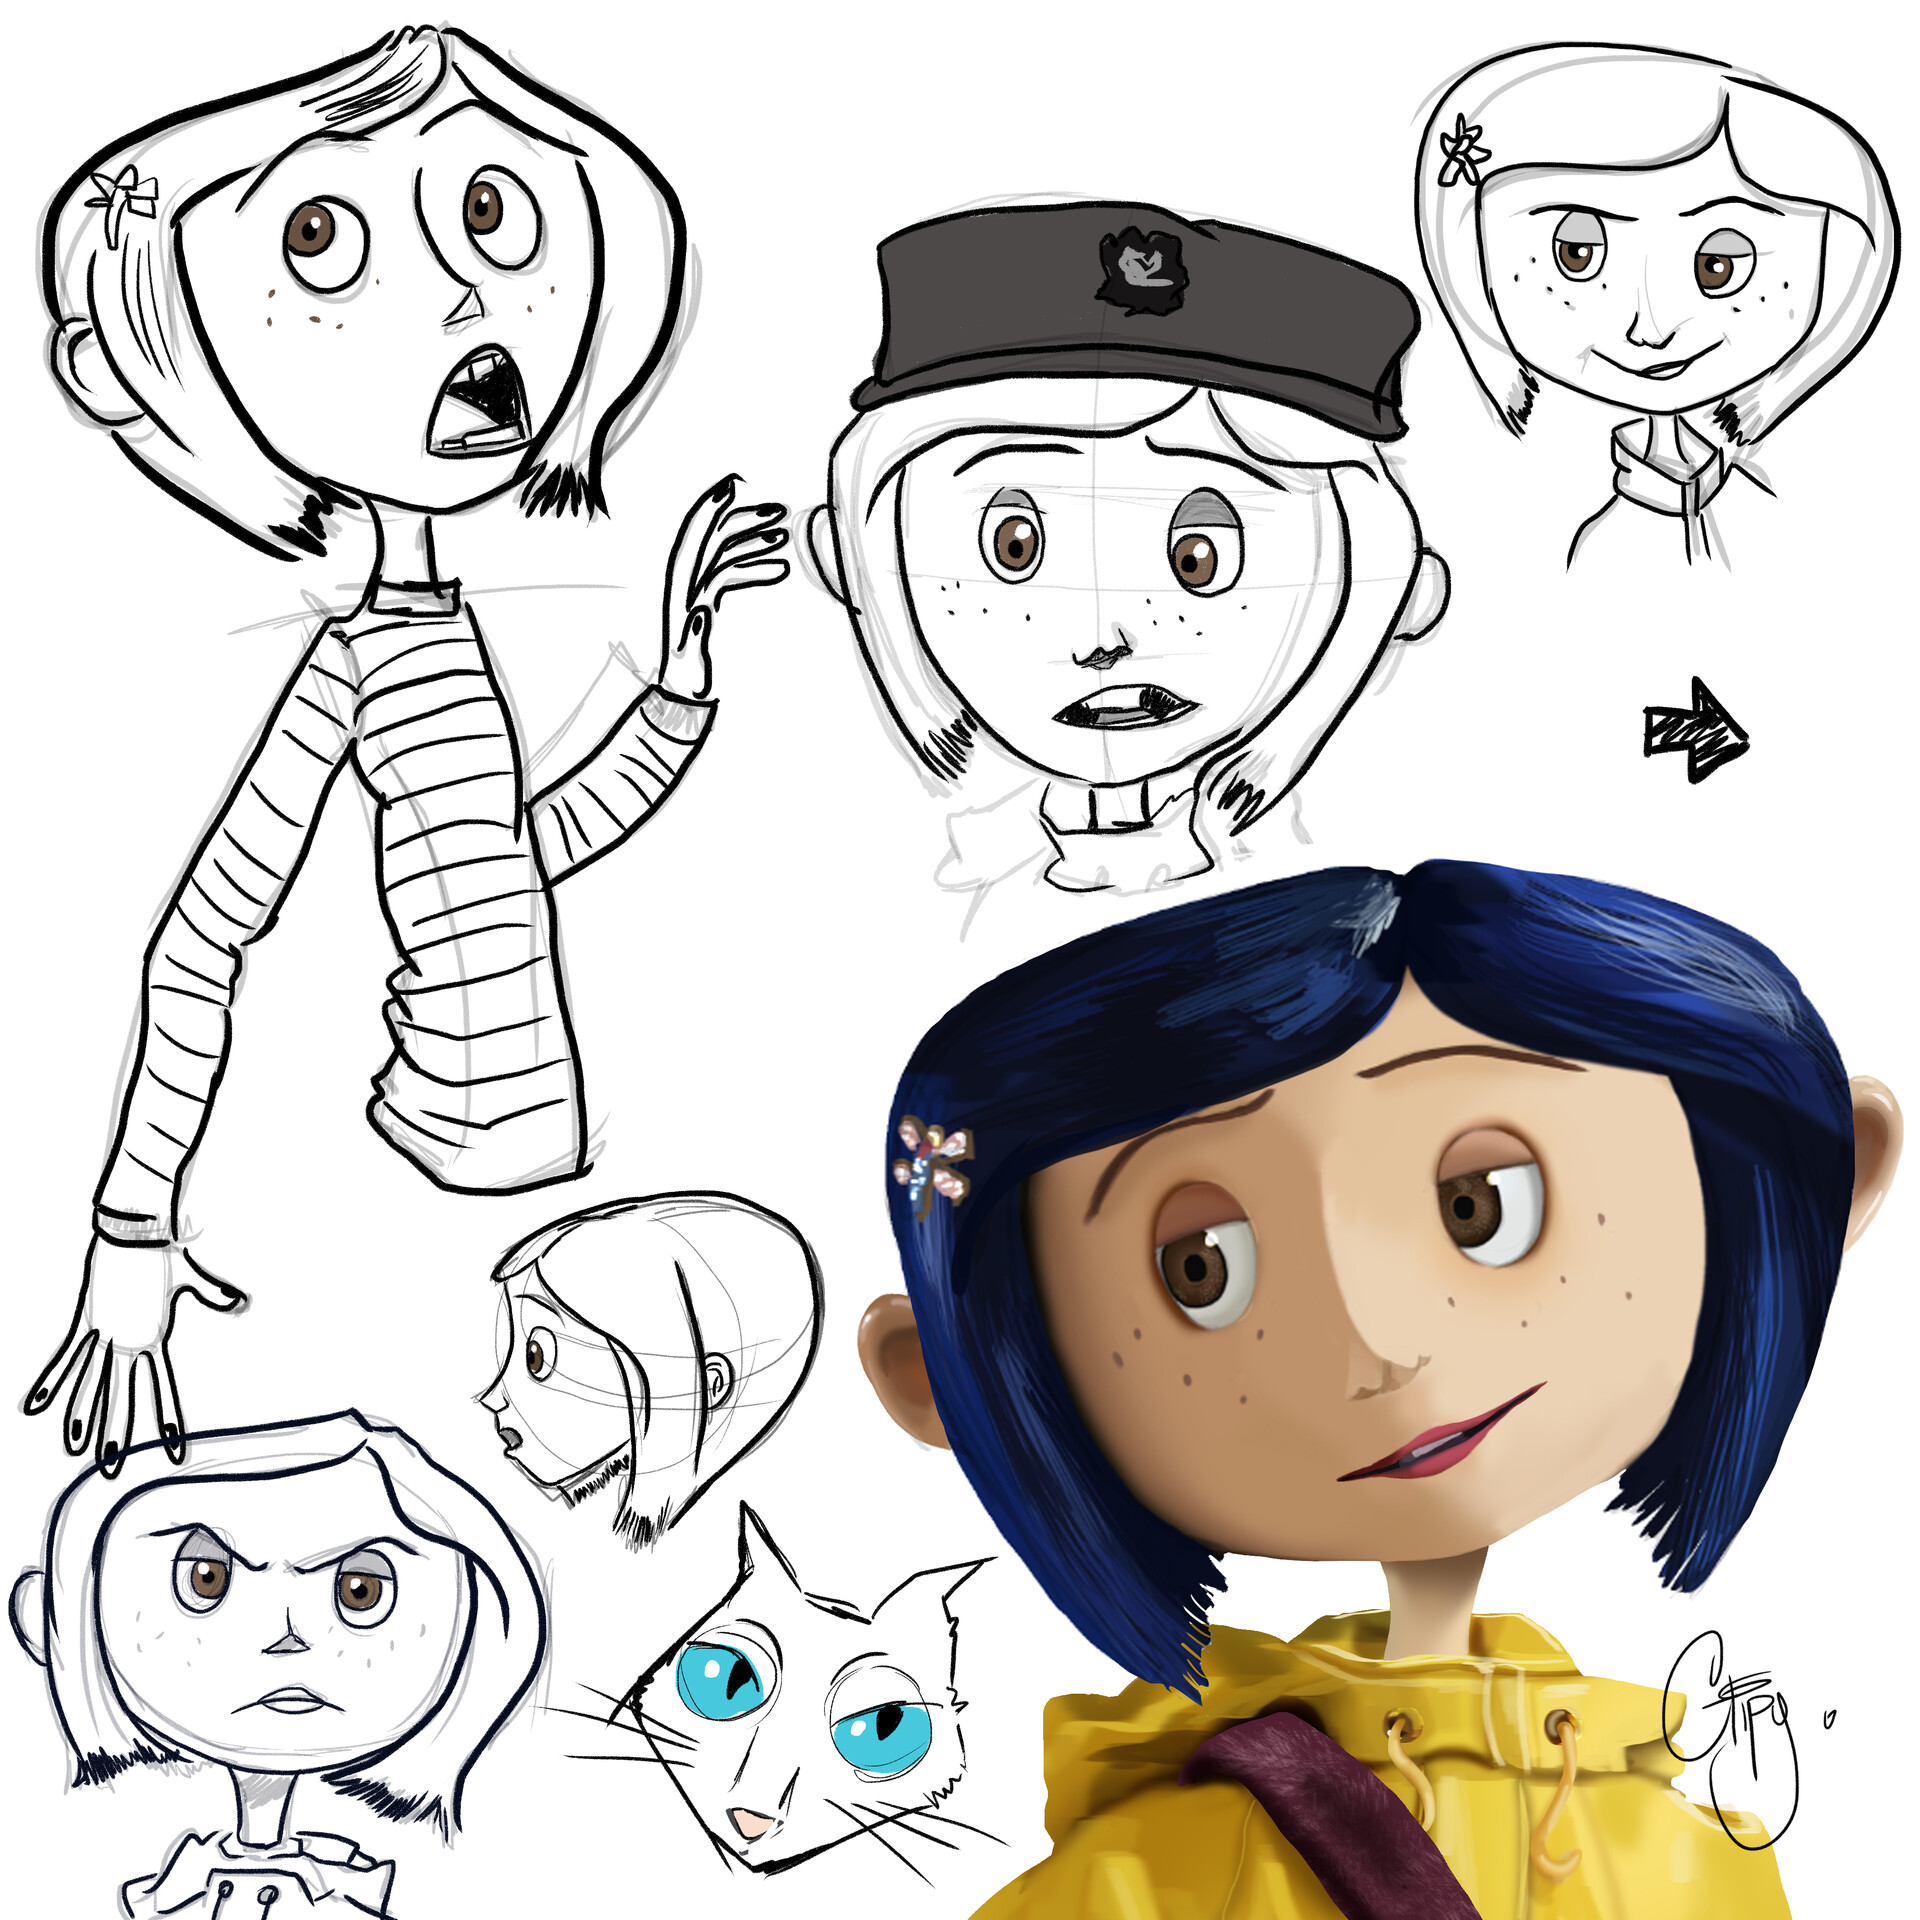 coraline characters drawings